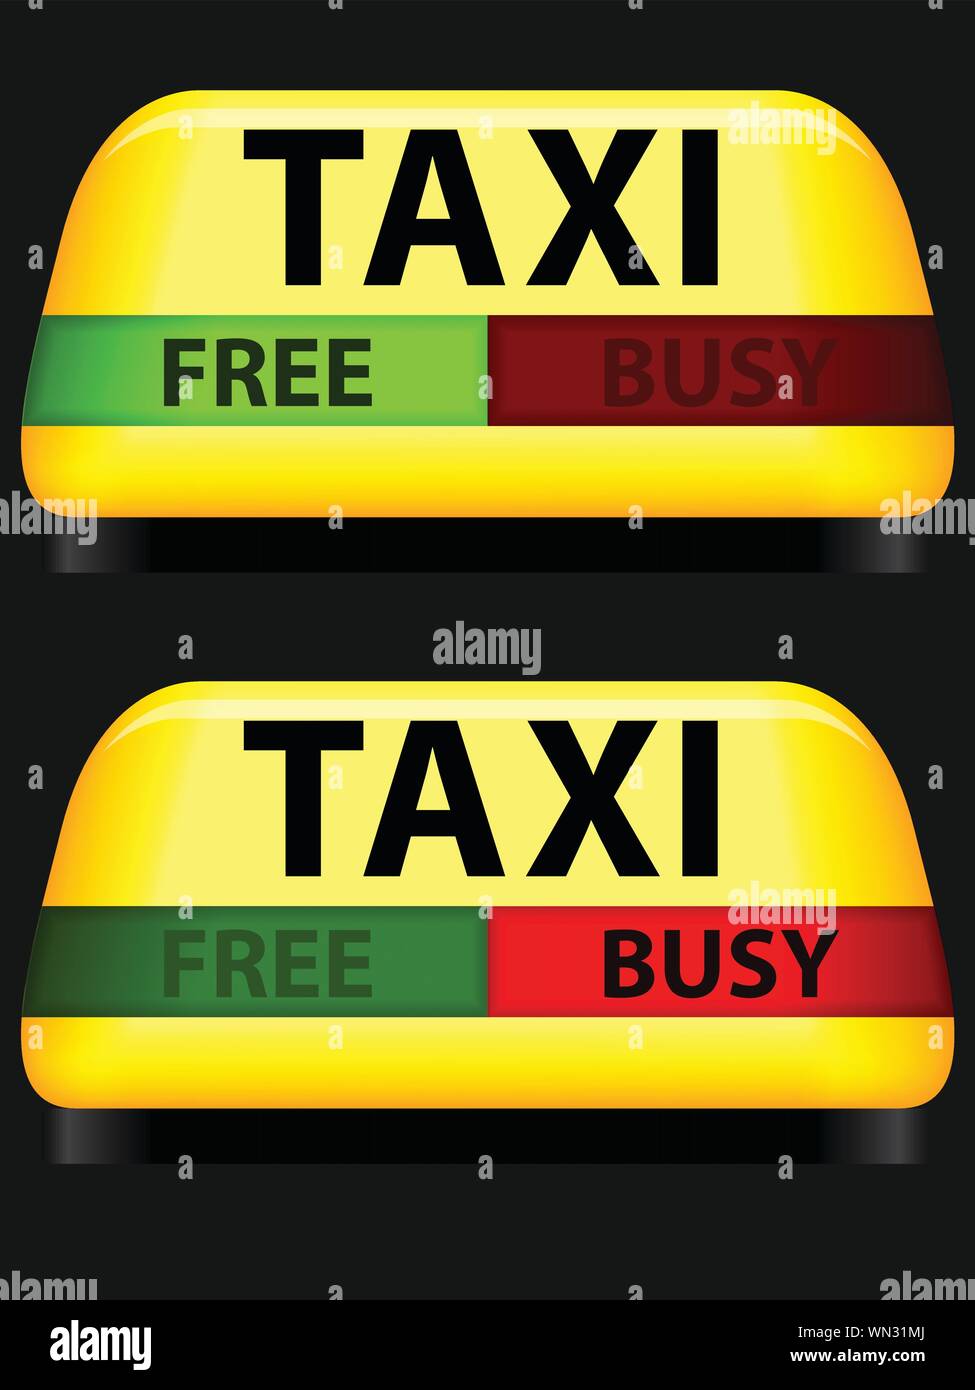 Taxi sign with free and busy lights Stock Vector